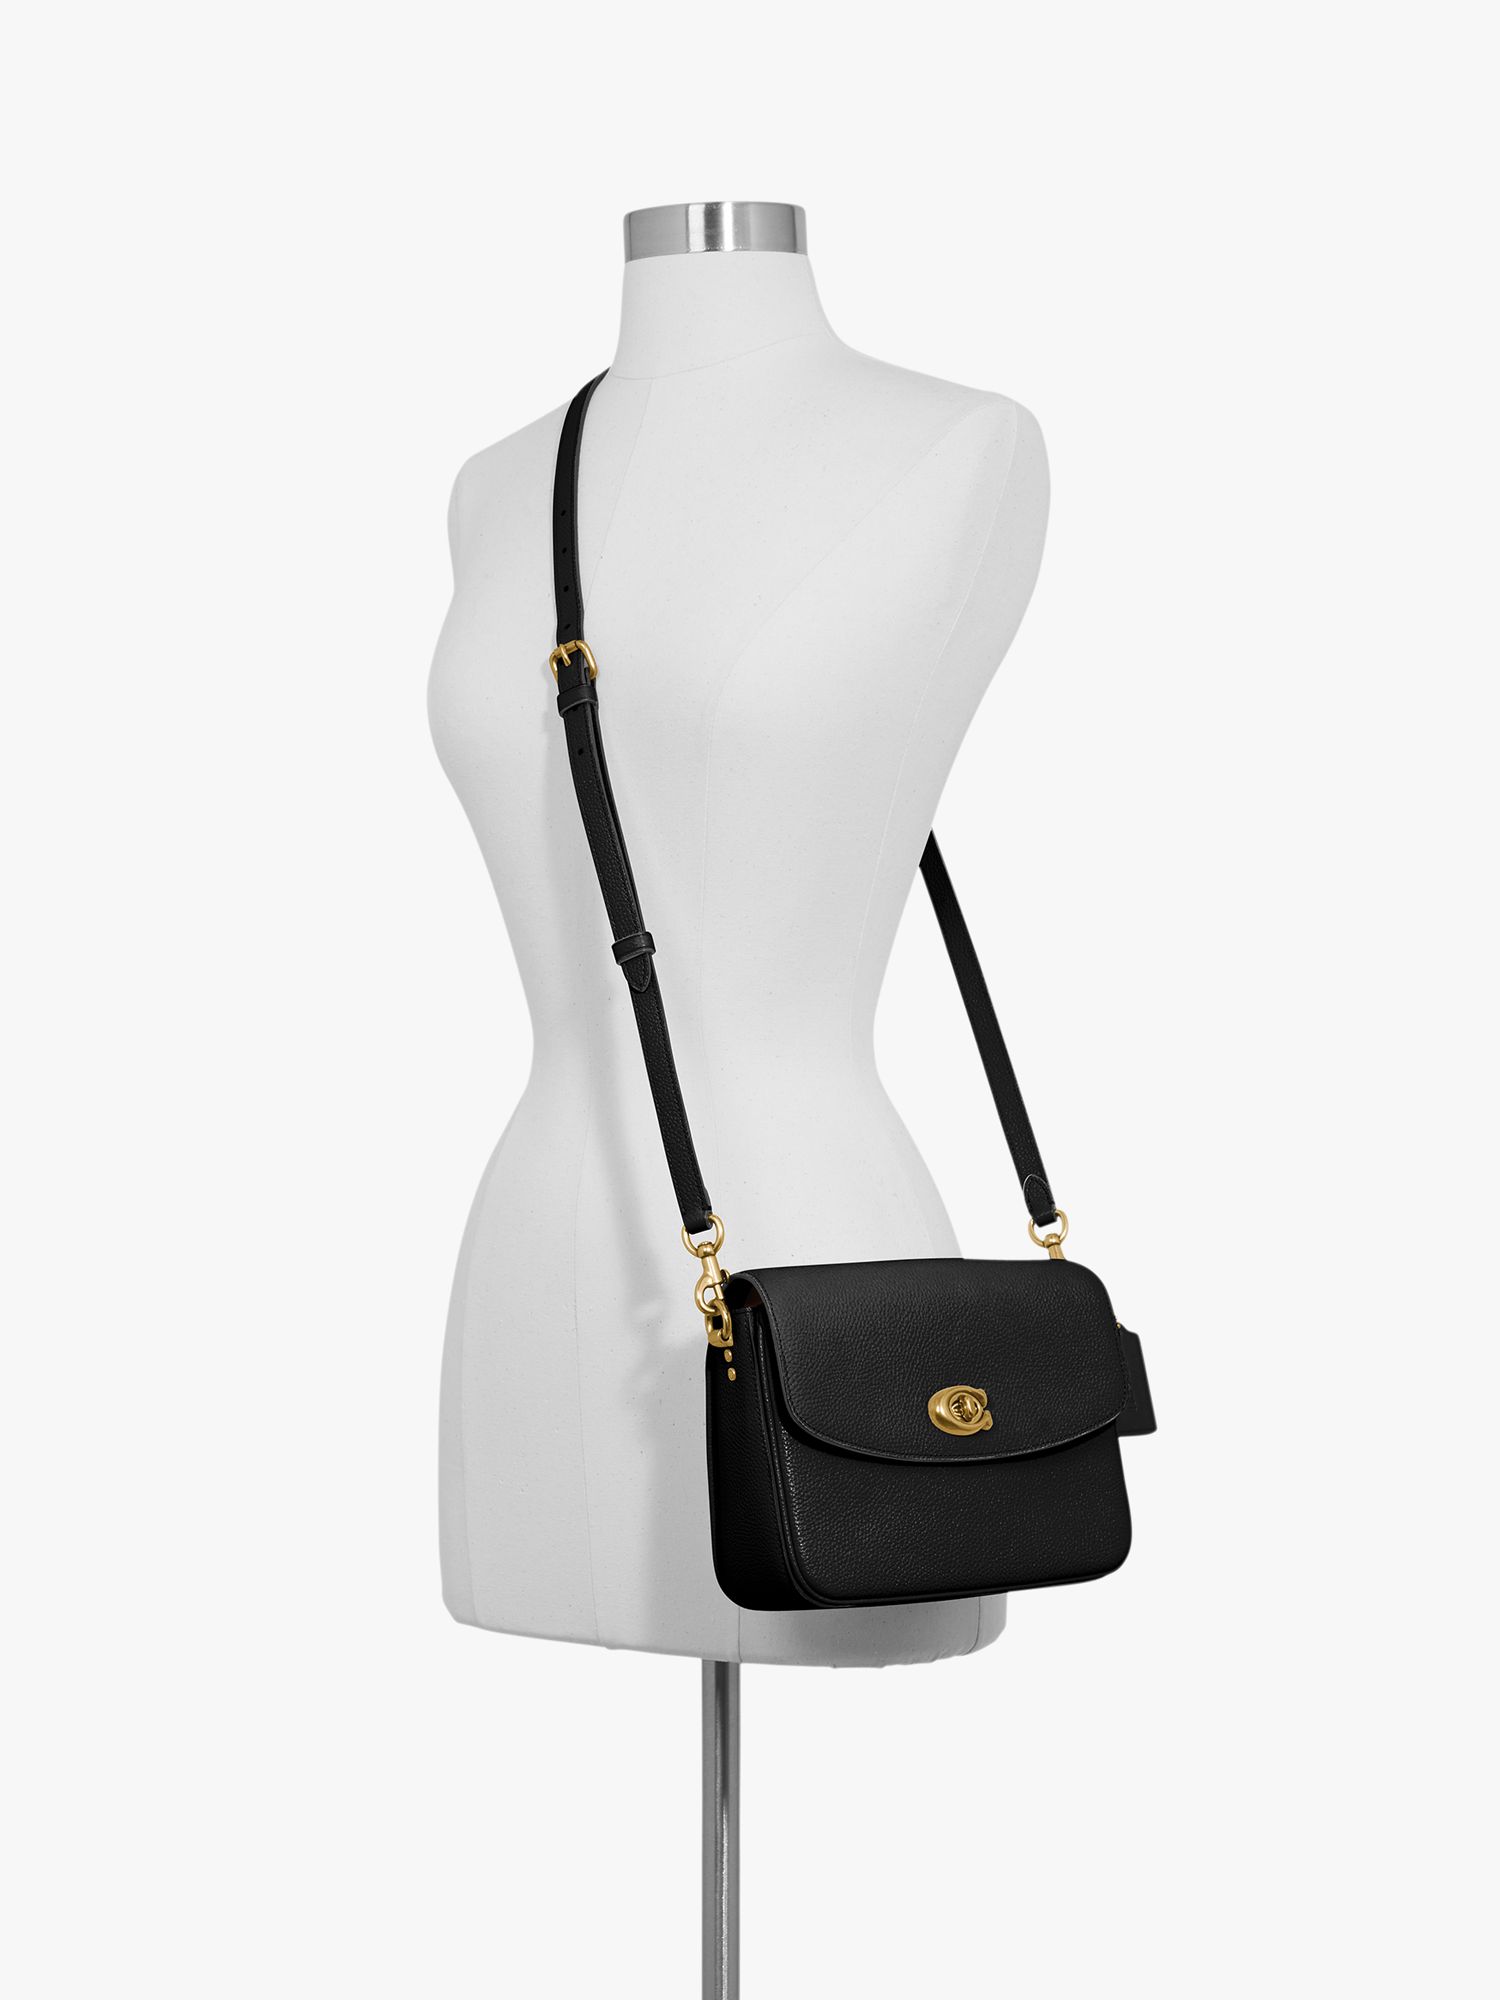 Coach Cassie 19 Leather Cross Body Bag, Black at John Lewis & Partners